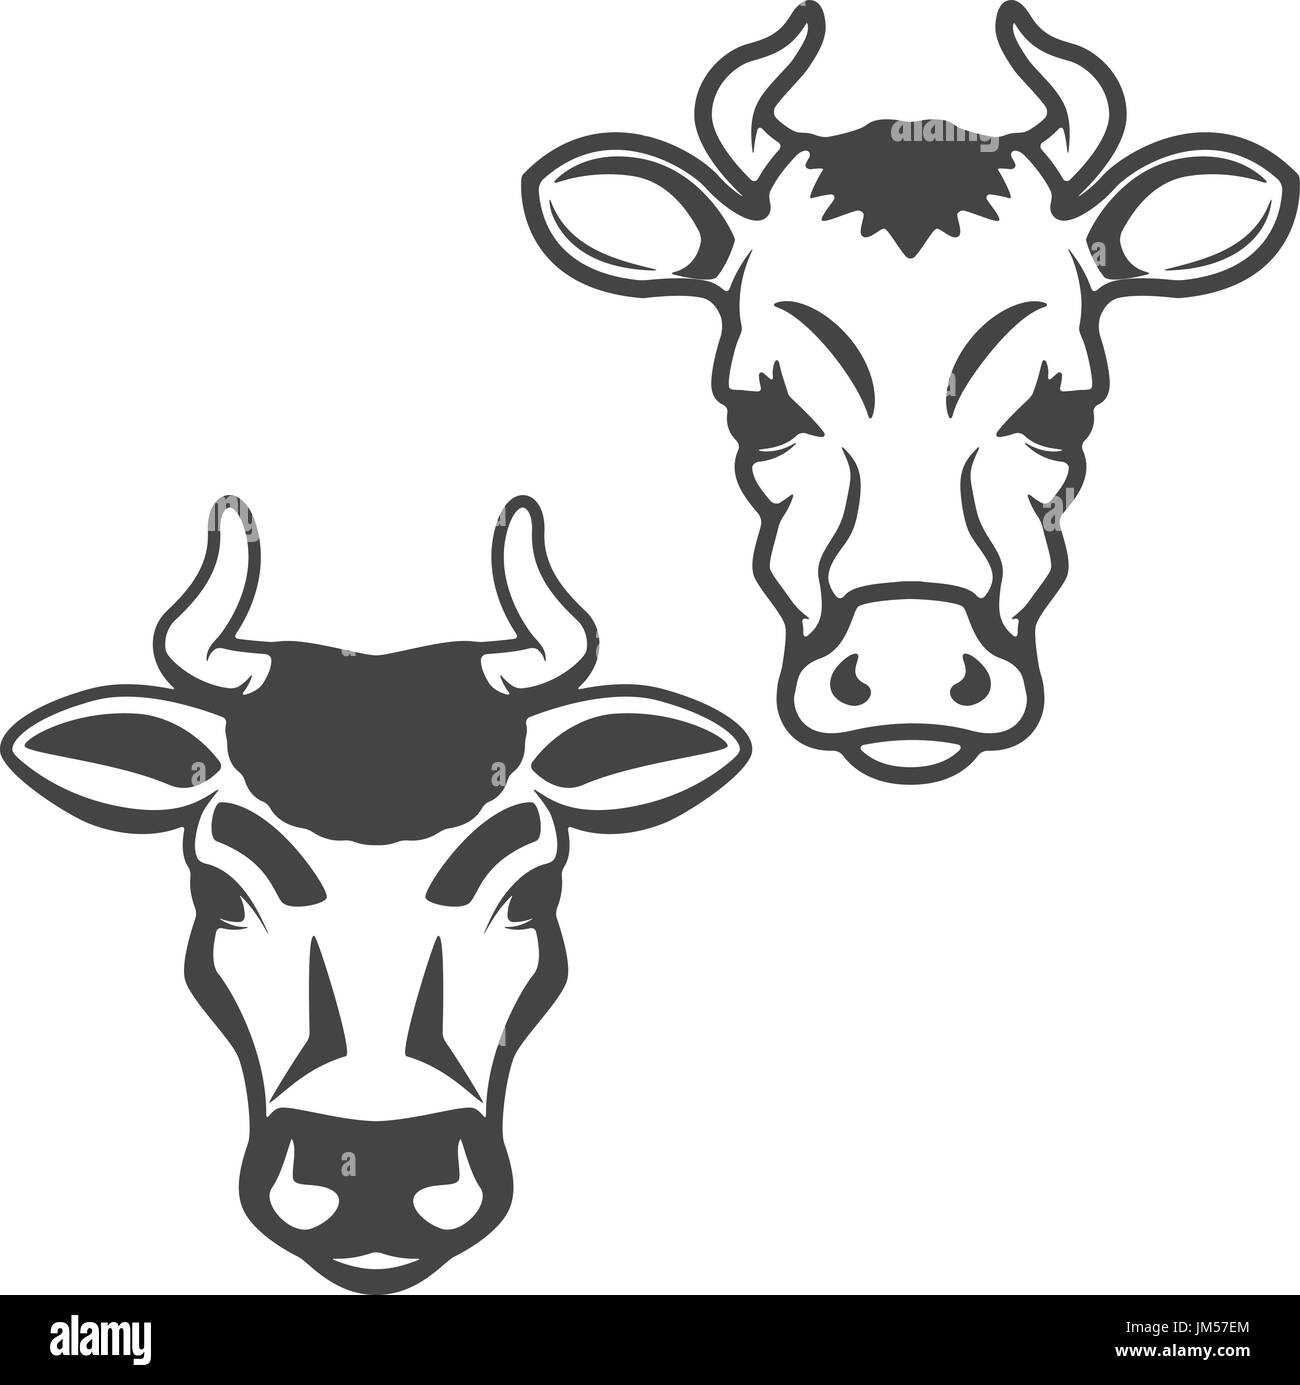 Set of cow heads isolated on white background. Design elements for logo, label, emblem. Vector illustration. Stock Vector